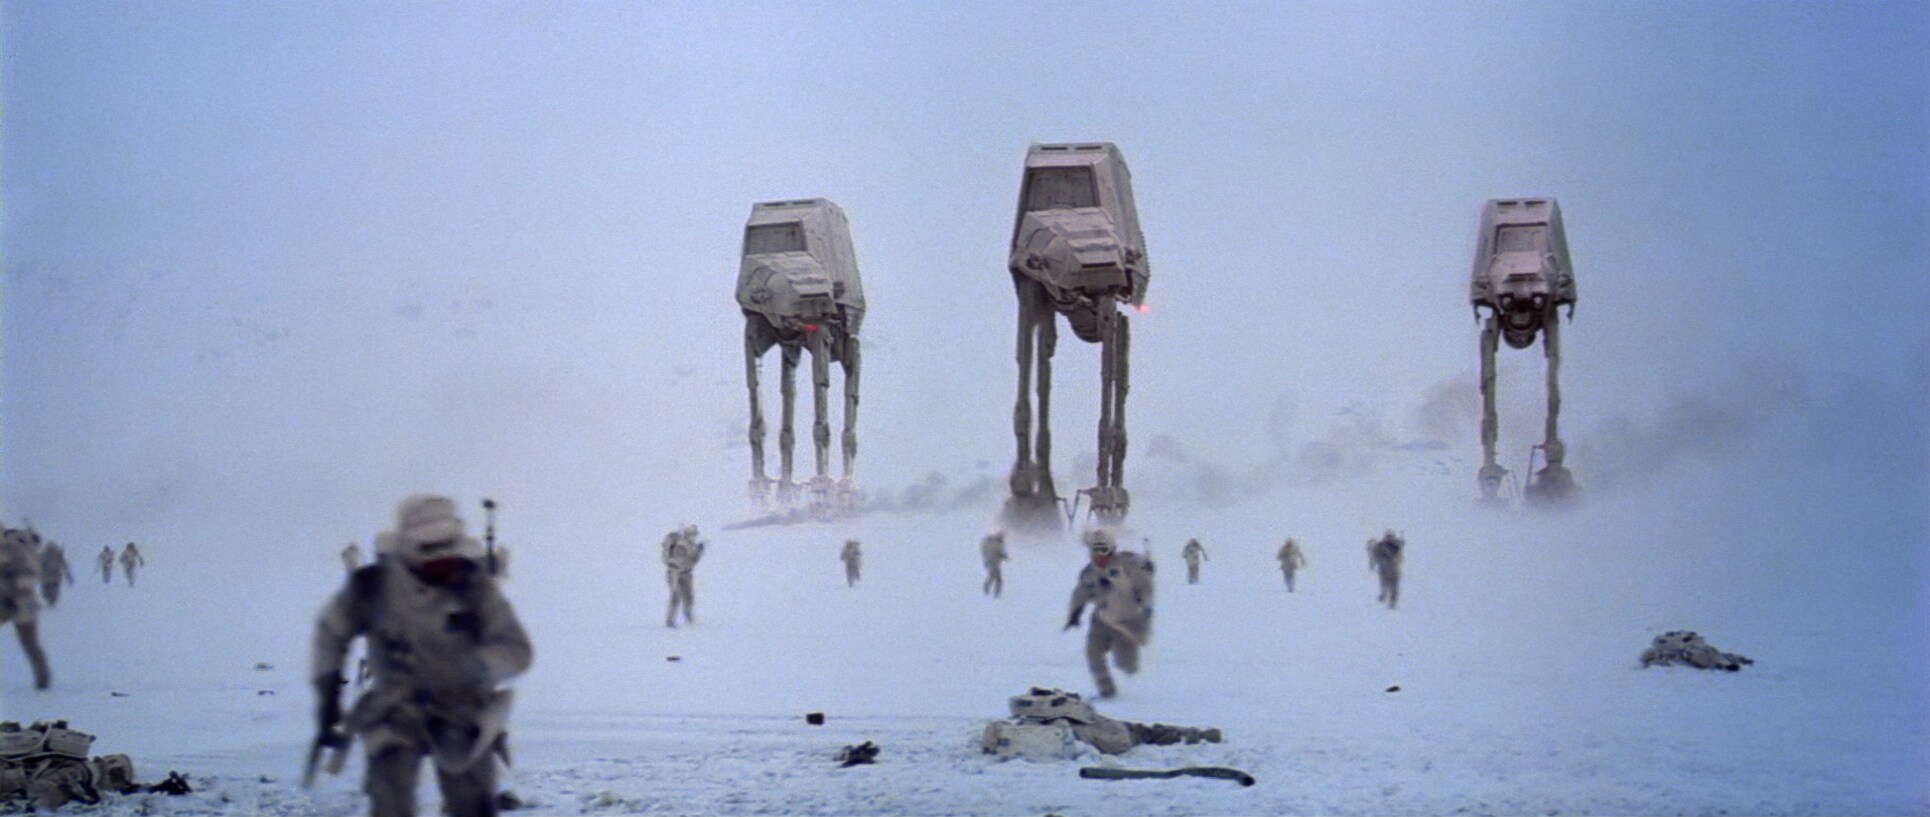 The rebels had barely settled in on Hoth when the Empire discovered their base and stormed it wit...